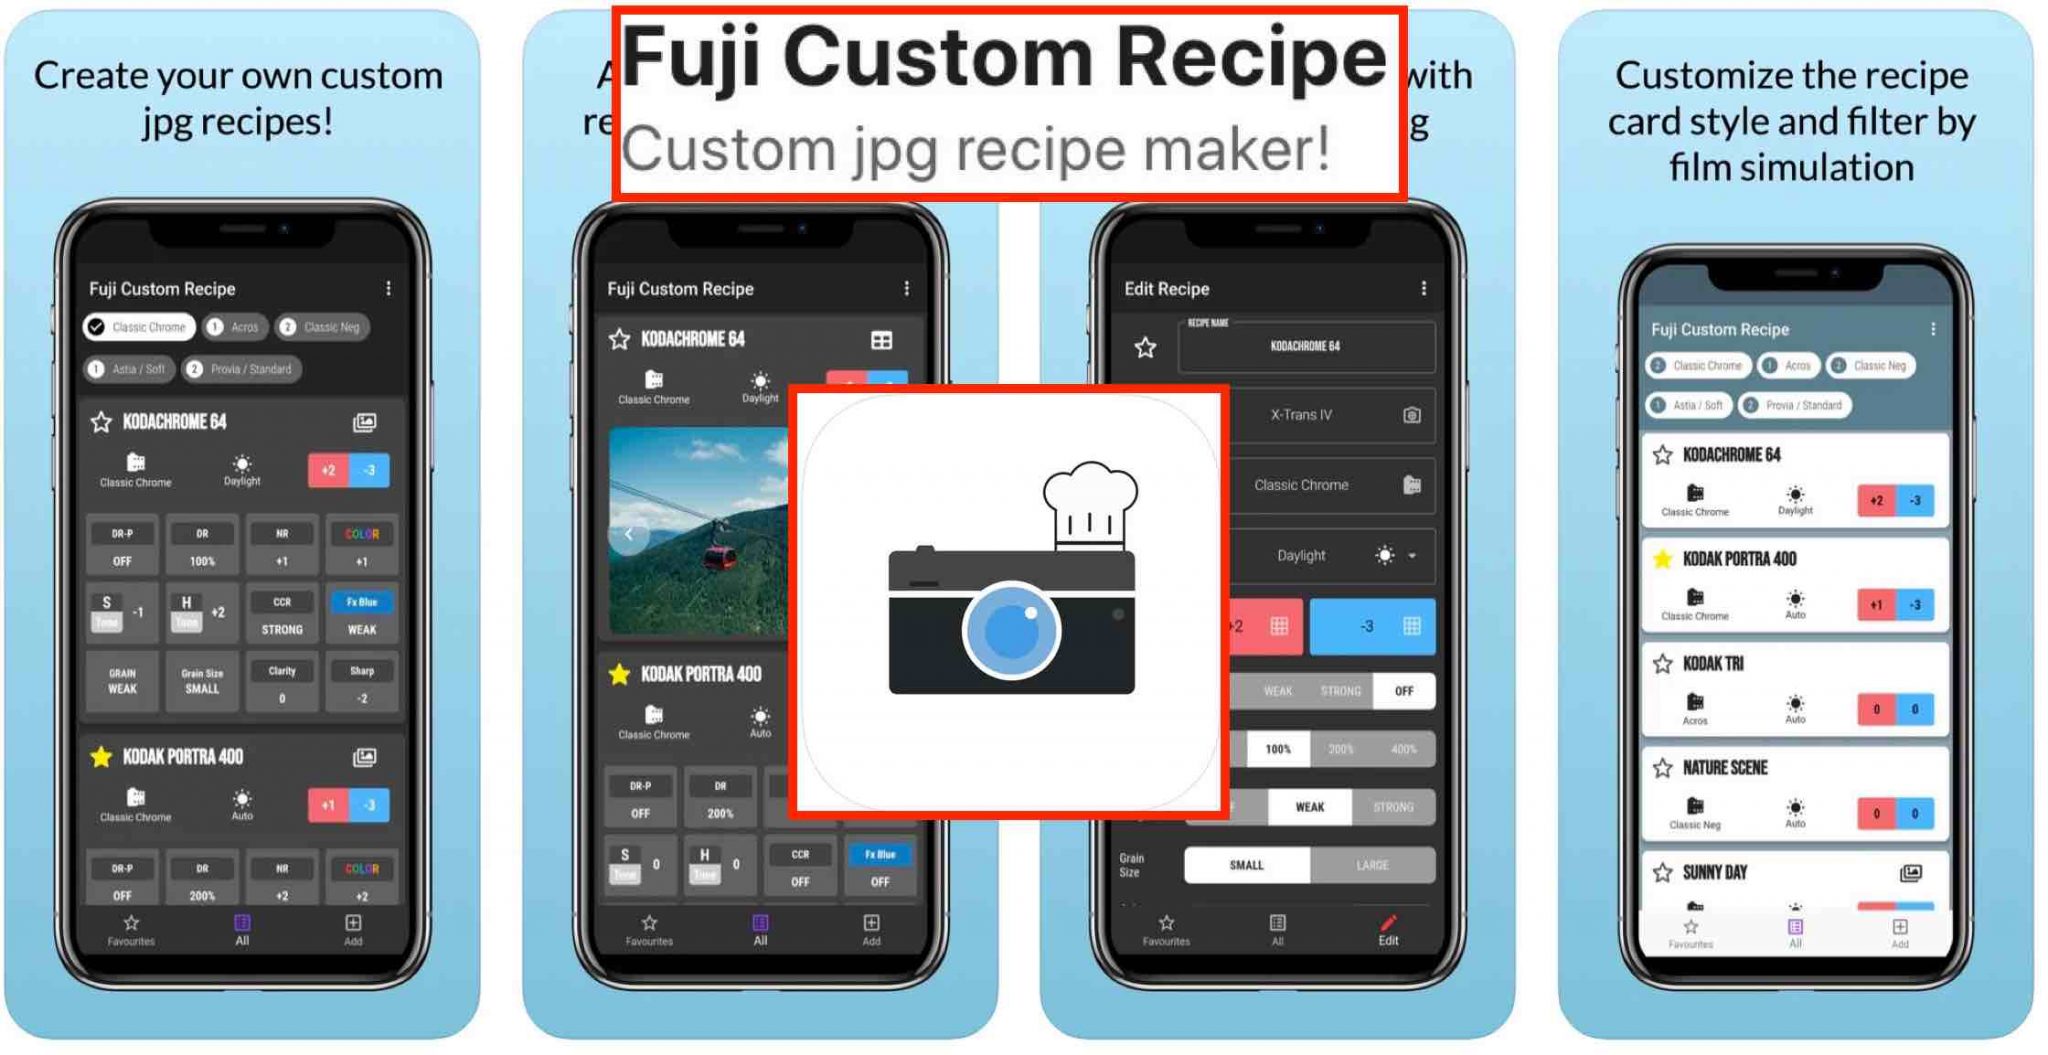 This App Allows You to Save Your Own Film Simulation Recipes on Your